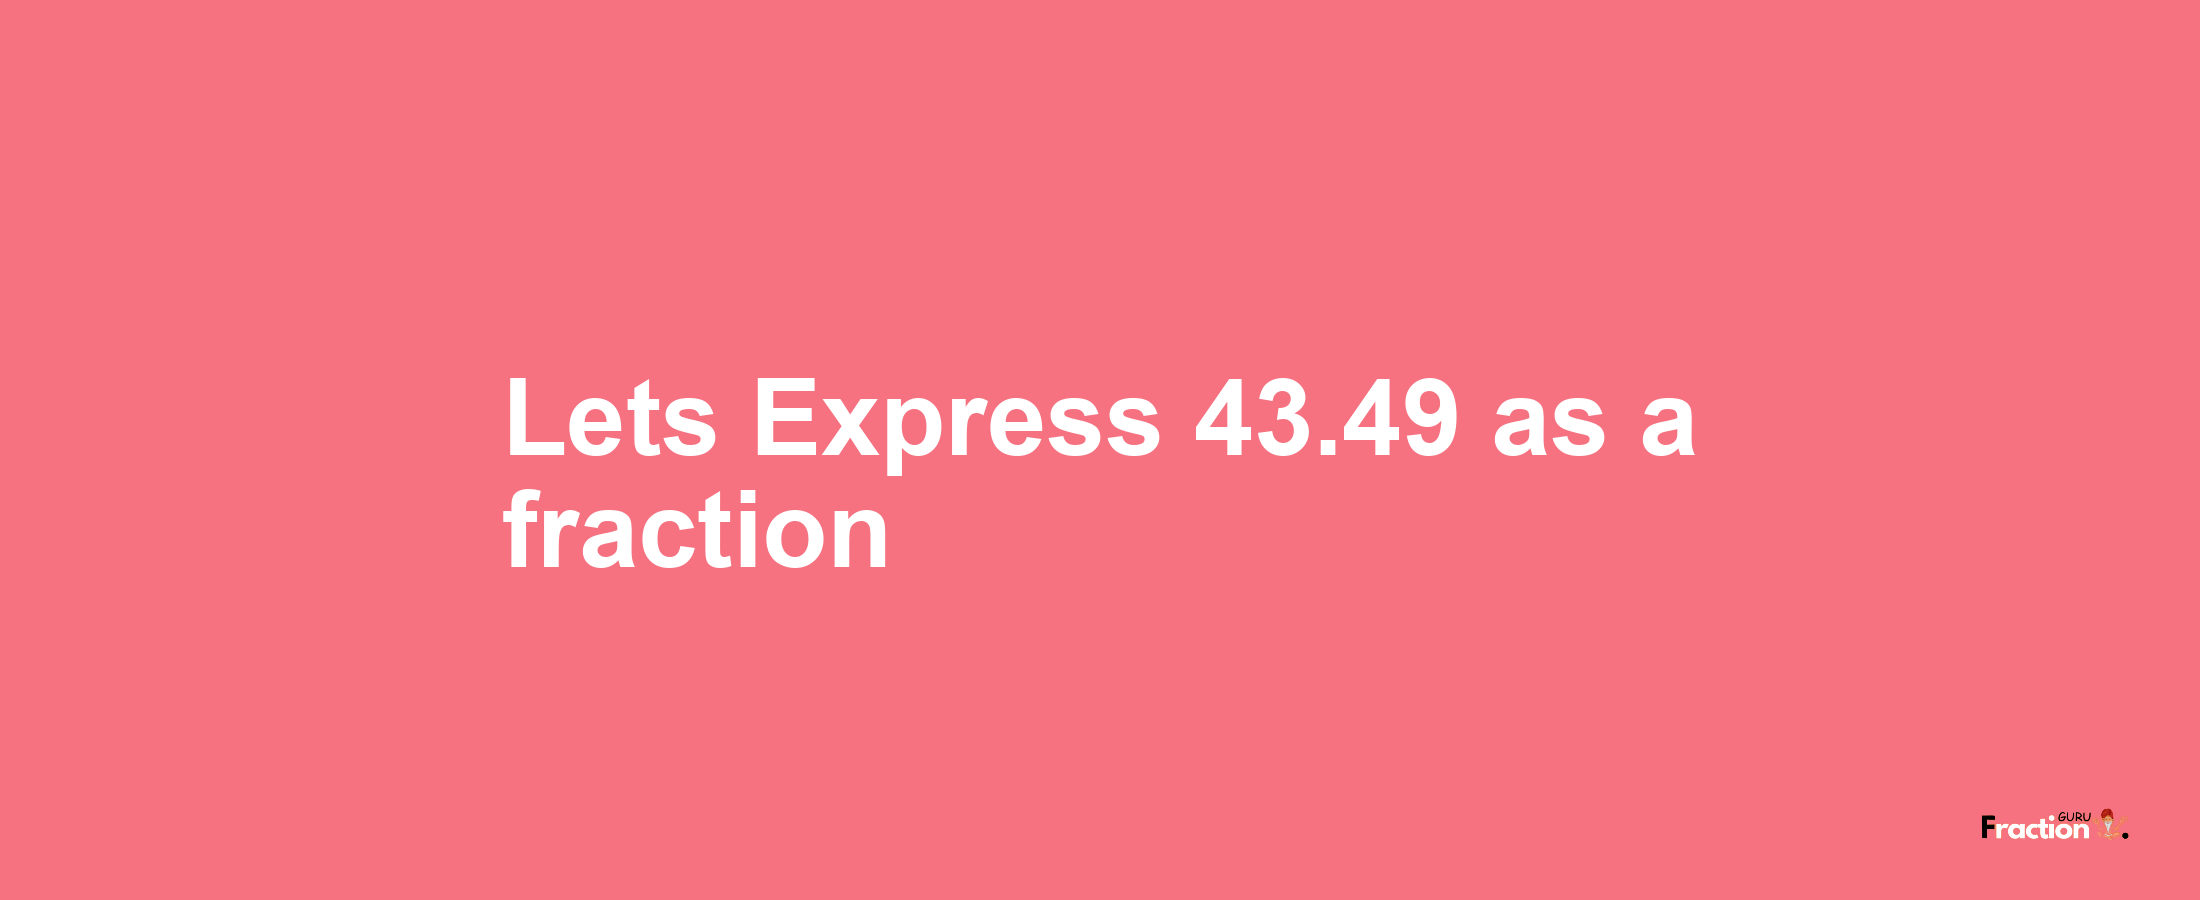 Lets Express 43.49 as afraction